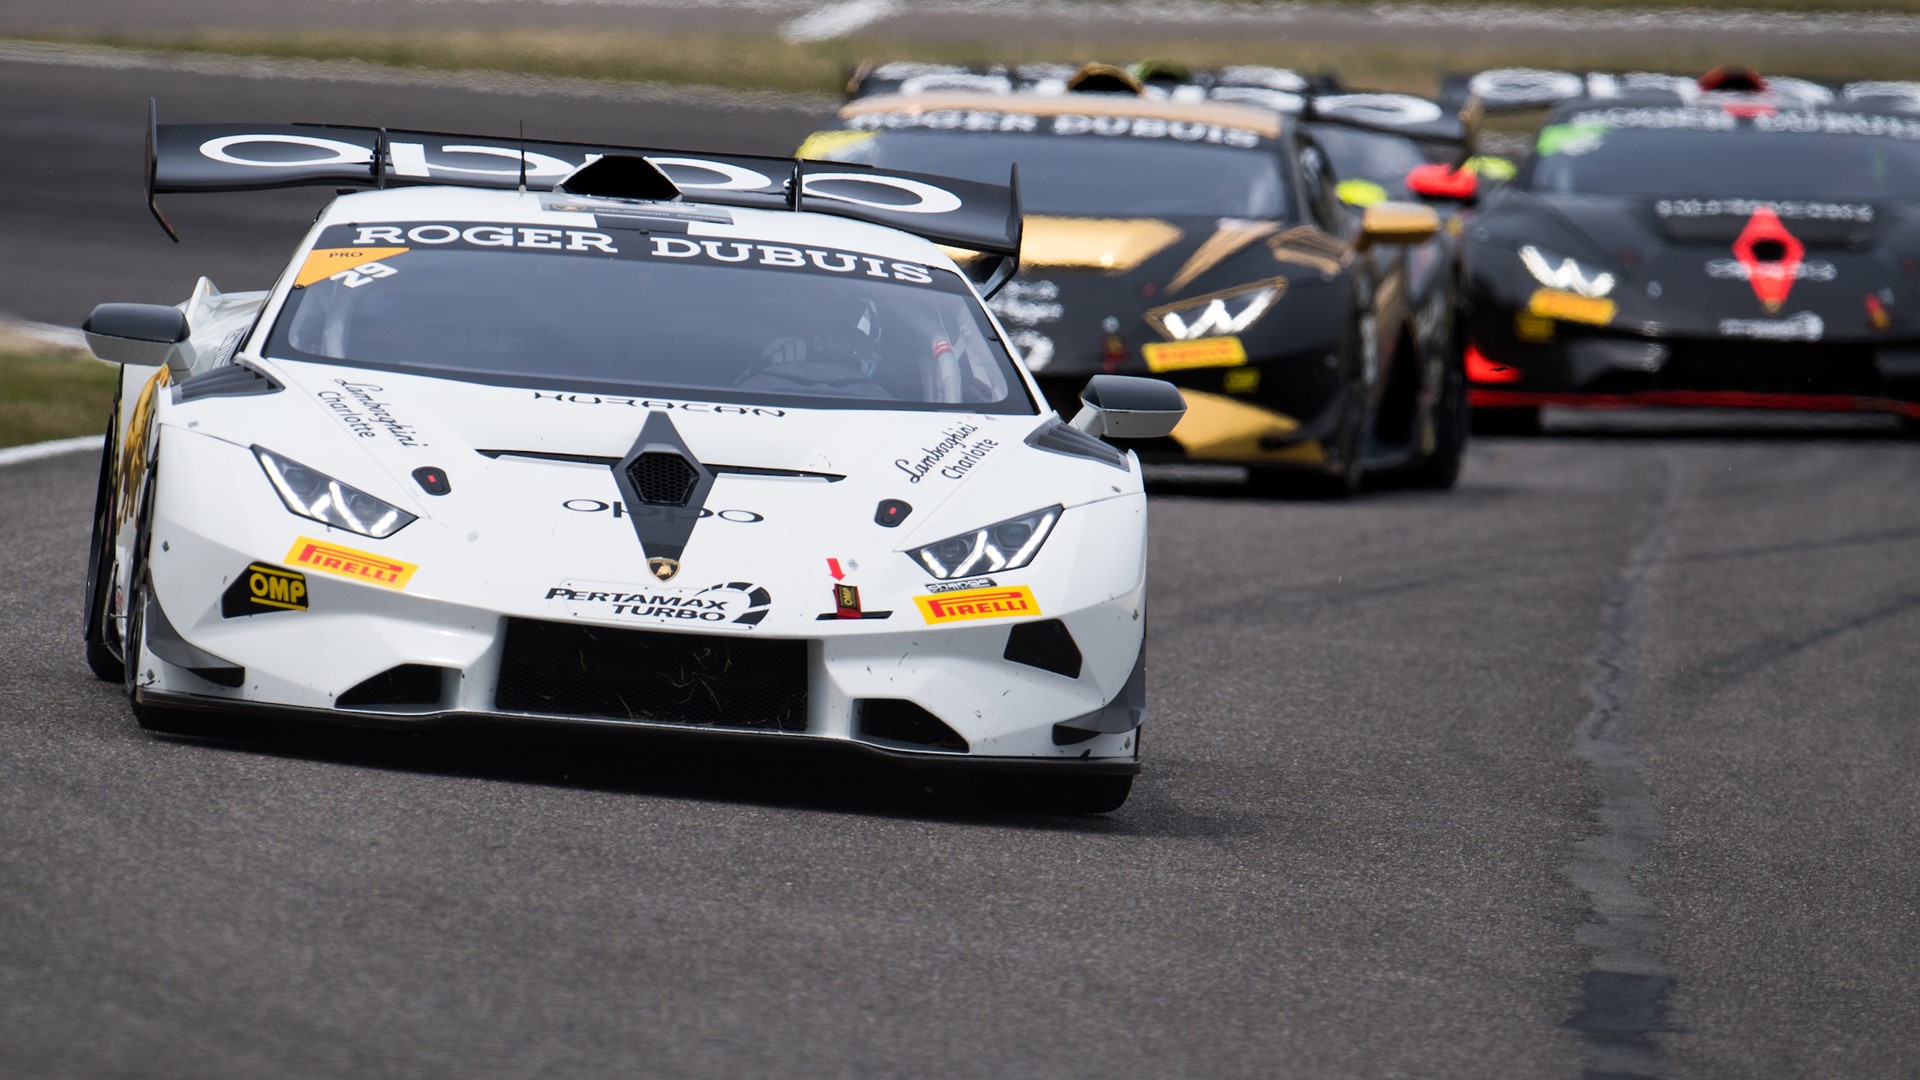 Teams and Drivers Make it Back-to-Back Victories at Barber Motorsports Park to start the 2019 Lamborghini Super Trofeo N